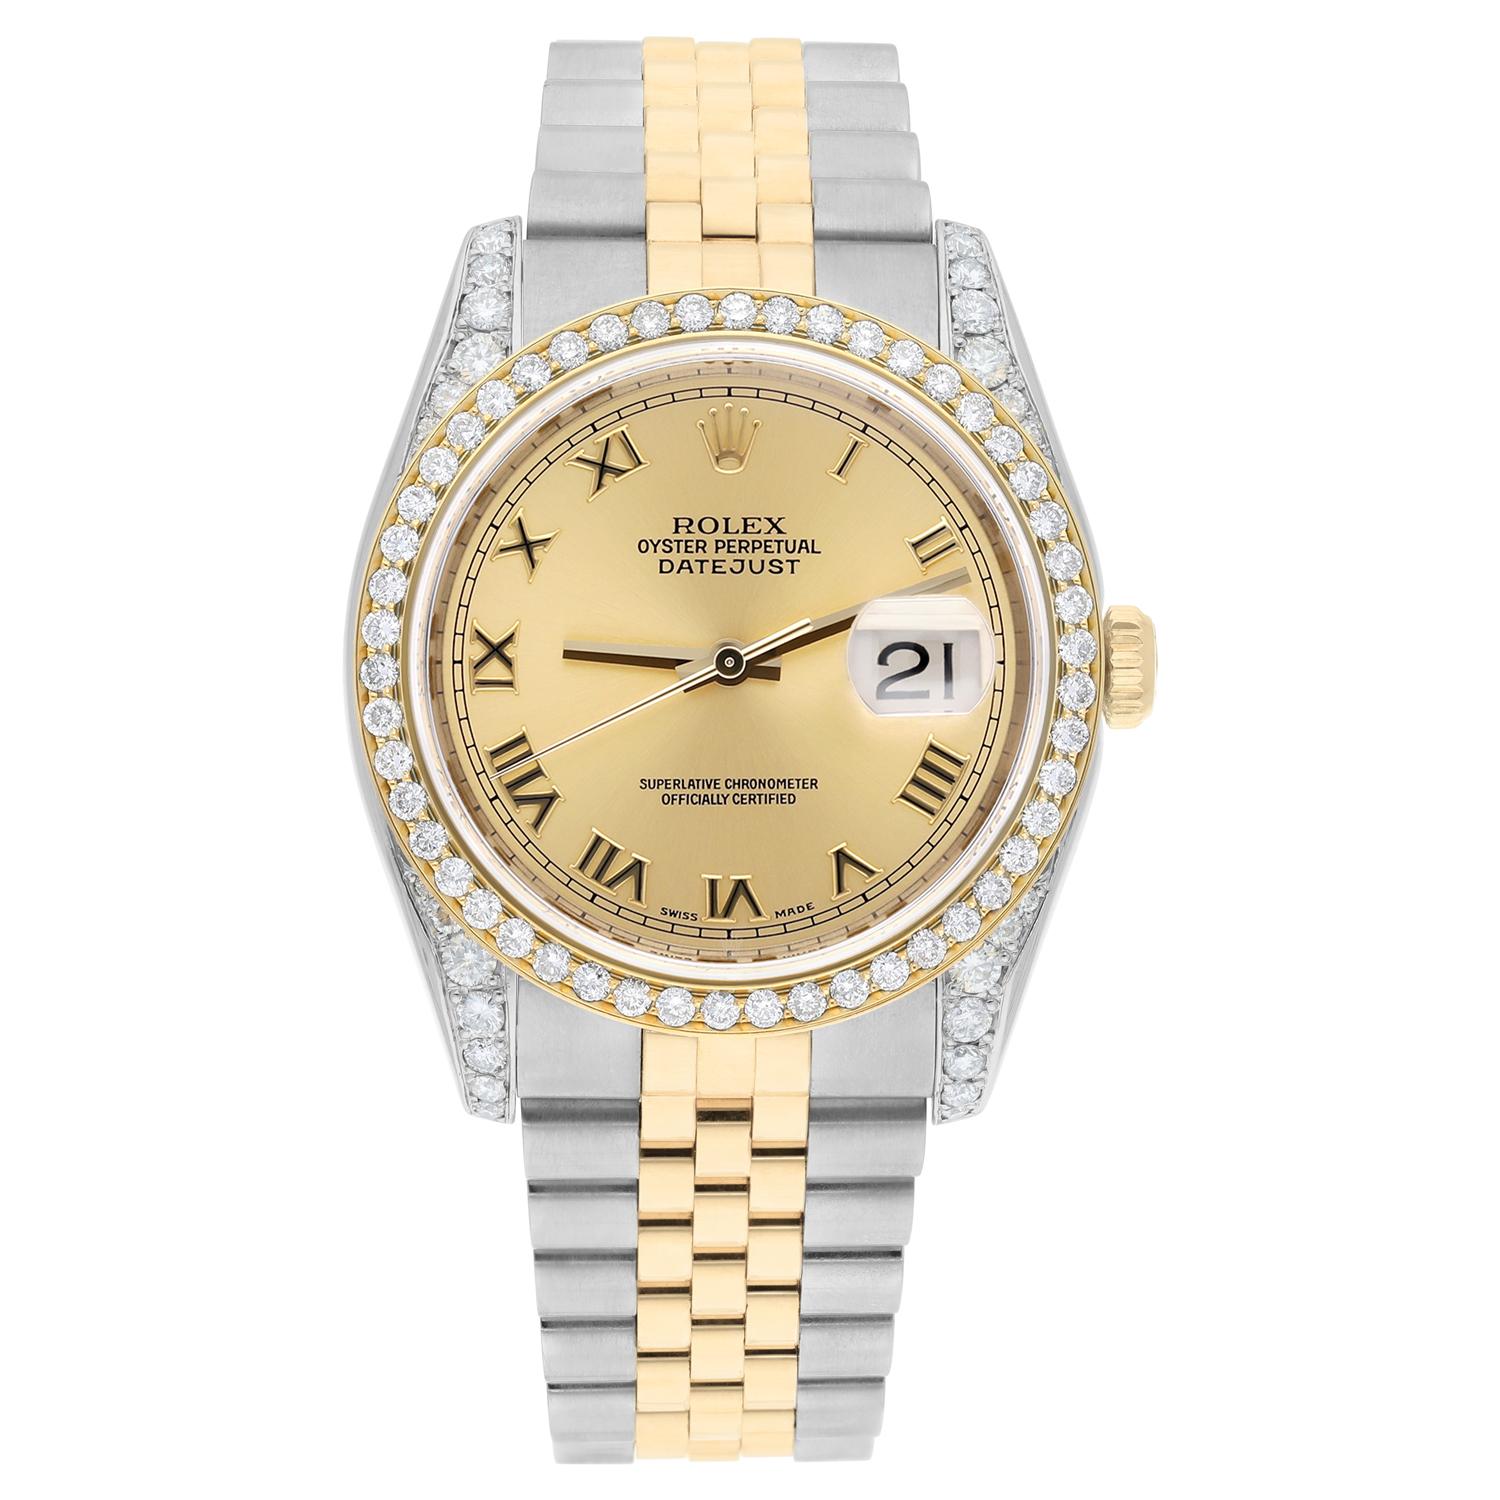 This watch has been professionally polished, serviced and is in excellent overall condition. There are absolutely no visible scratches or blemishes. Authenticity guaranteed!  Diamond bezel 18K gold plated, custom diamond set. Diamonds are 100%